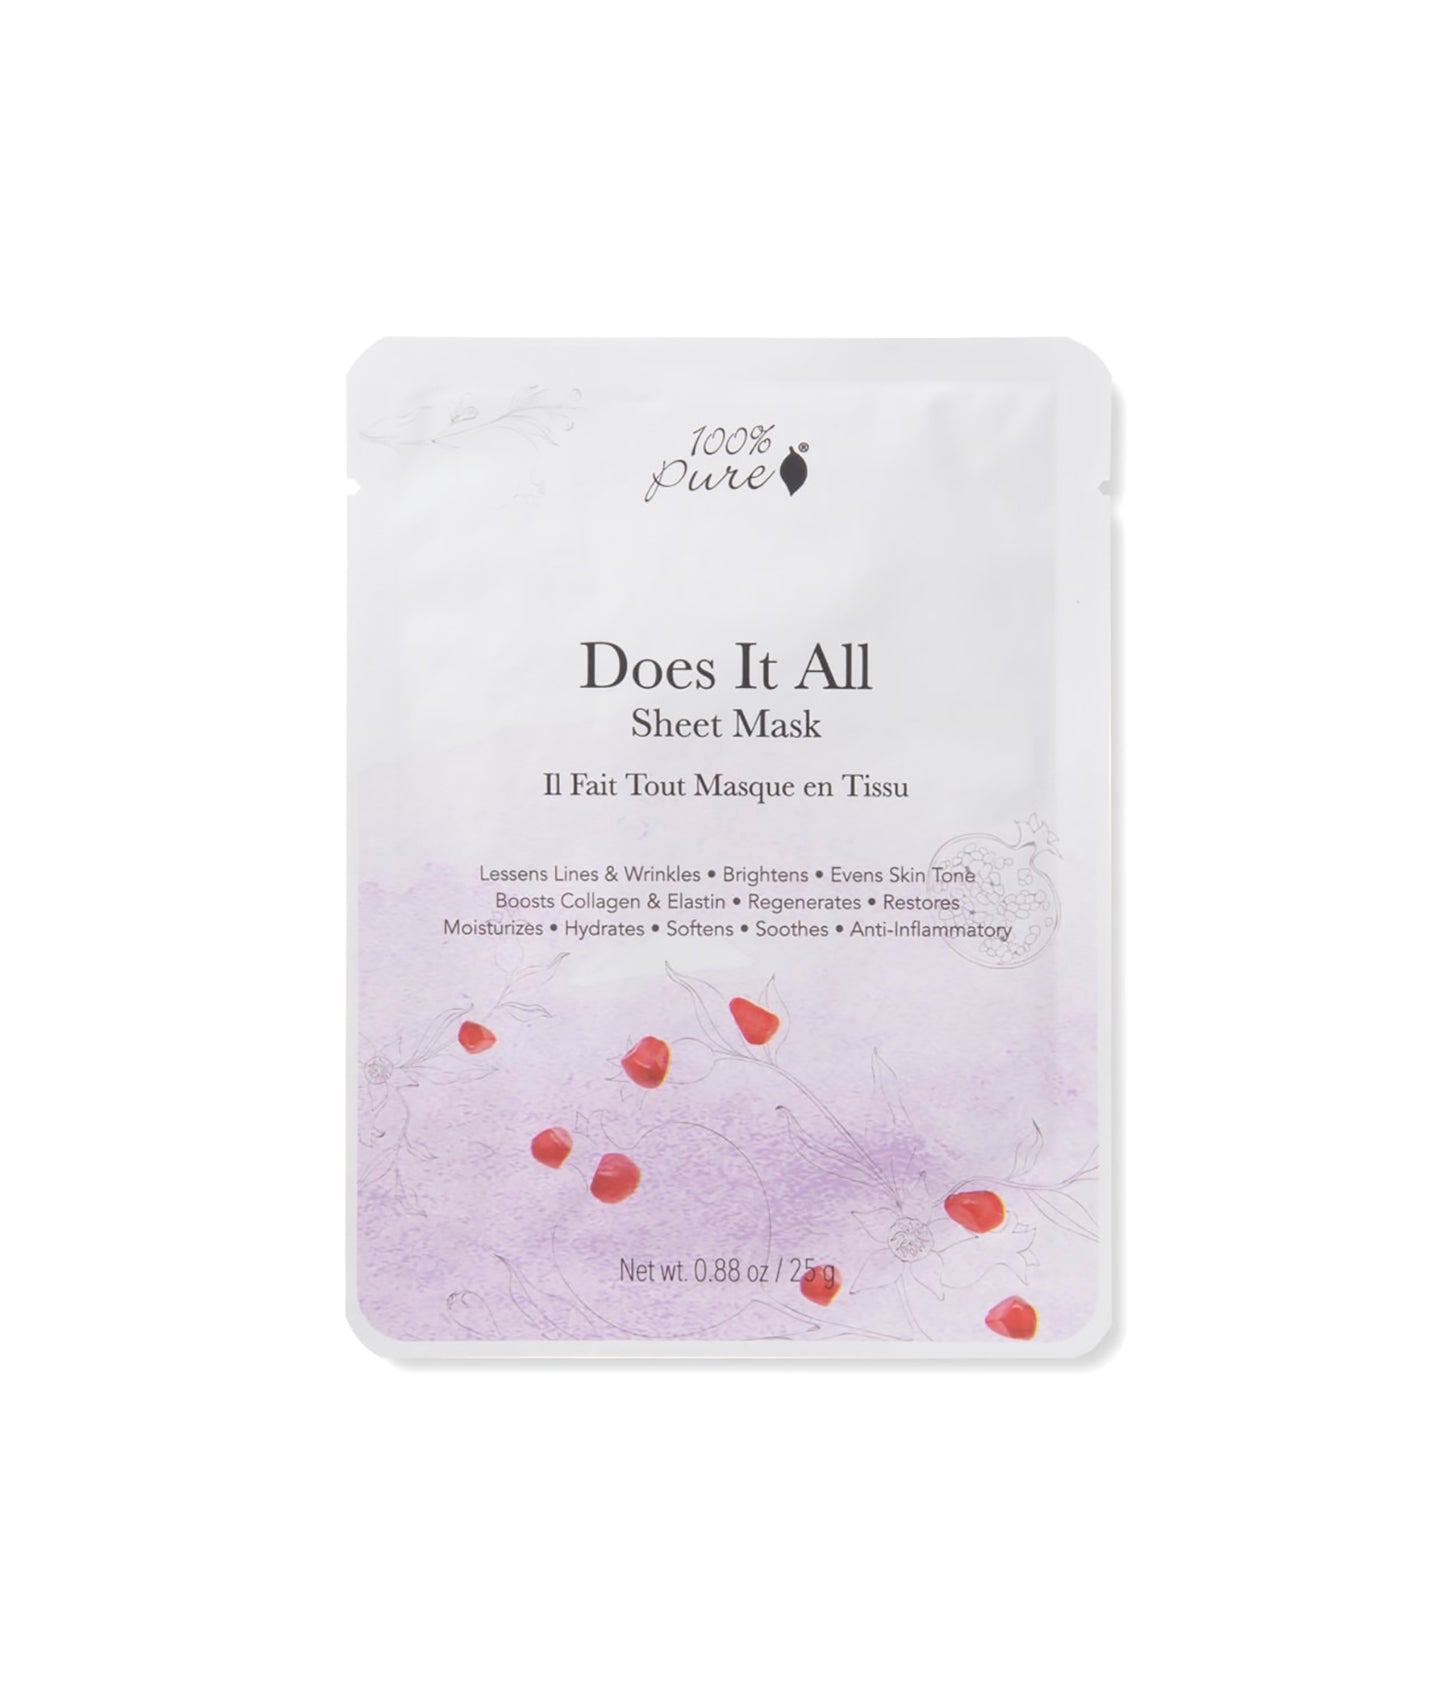 Does It All Sheet Mask